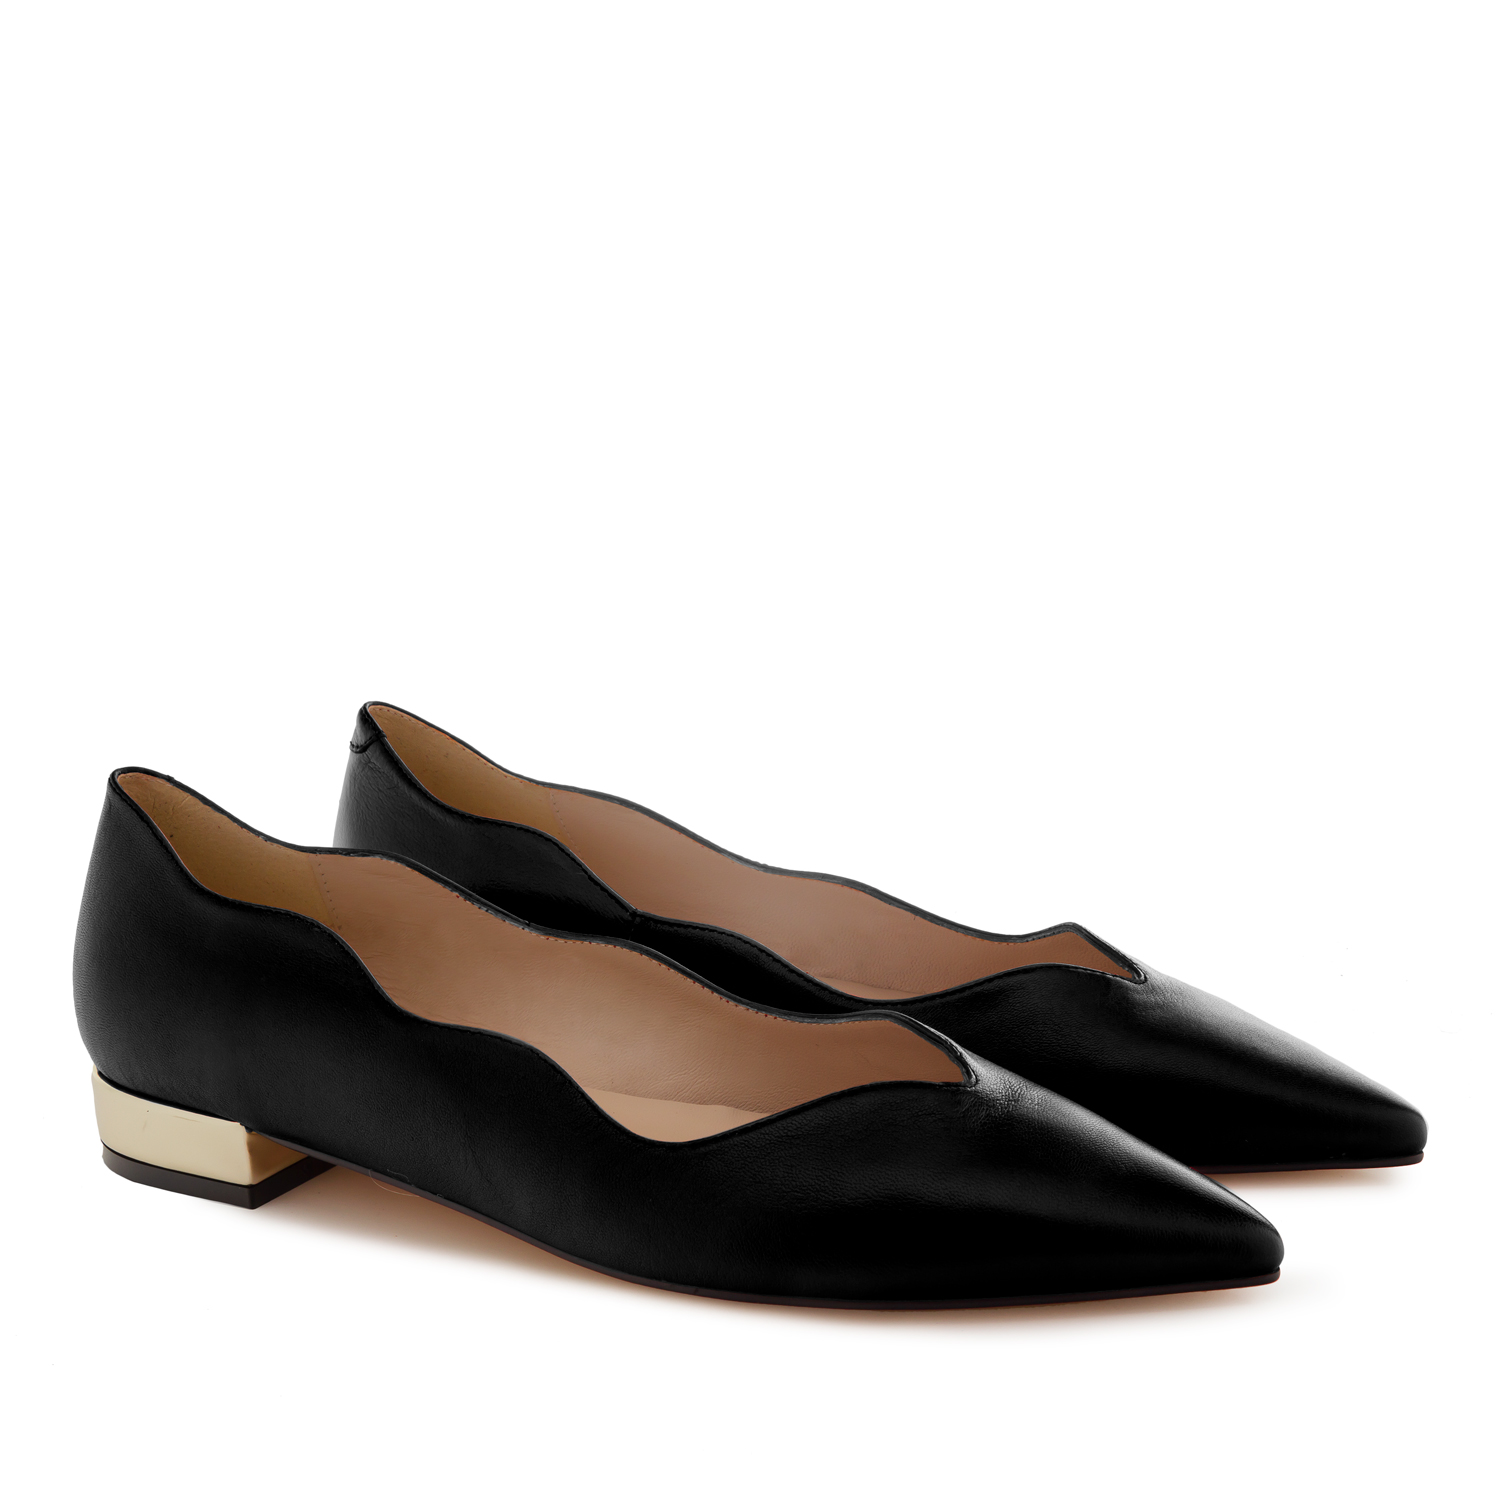 Waved Upper Ballet Flats in Black Nappa Leather 